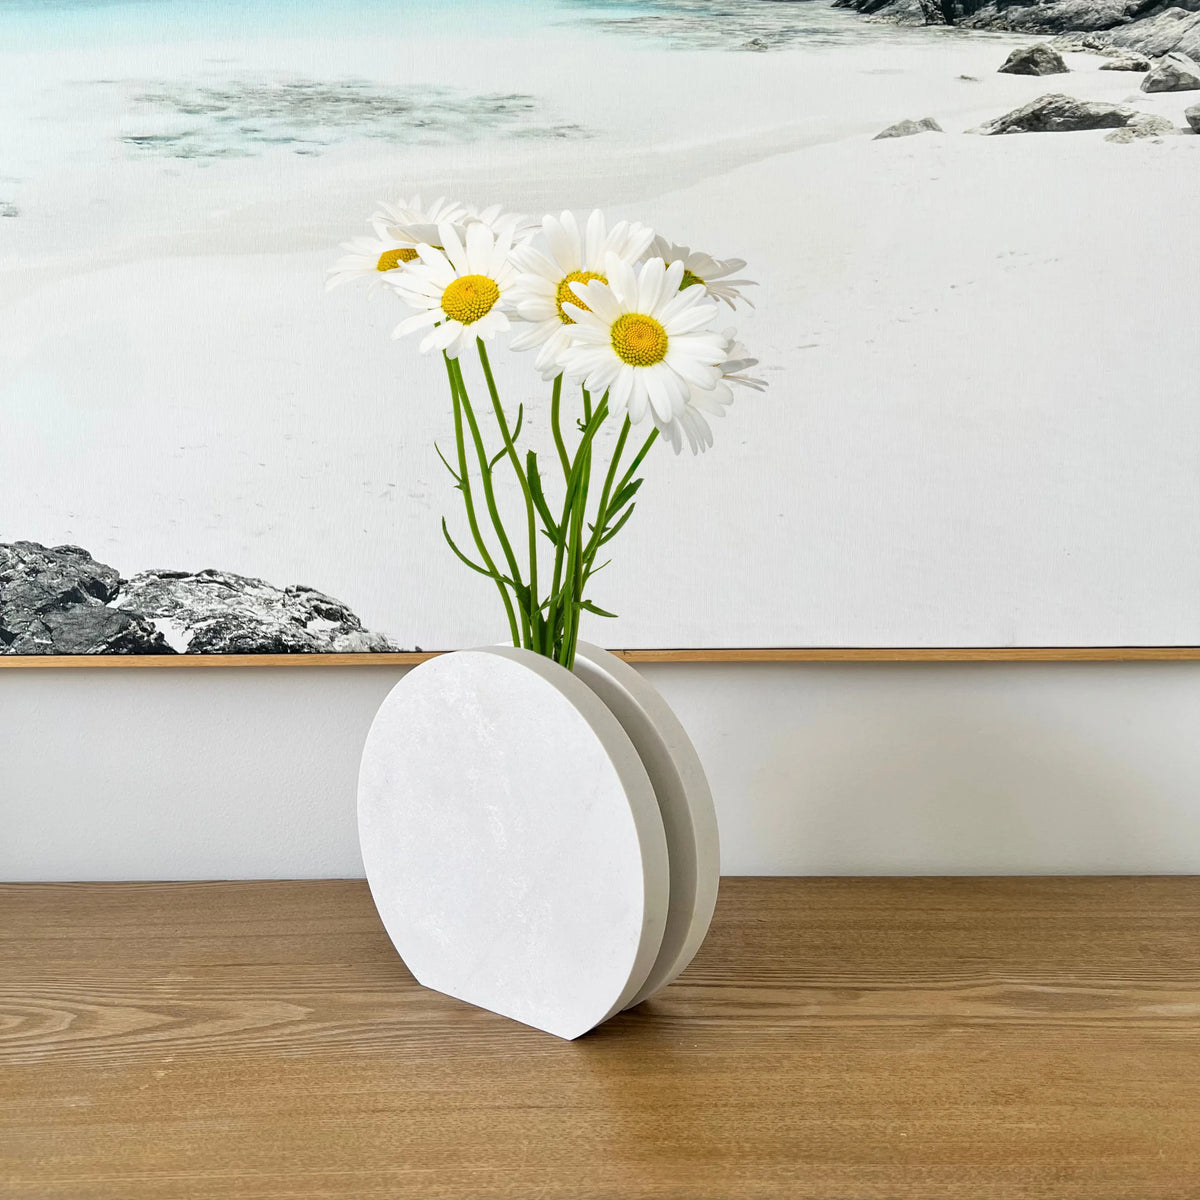 Image of Round Vase used to display daisies, a timeless display piece. Crafted from durable stone, evoking a luxurious contemporary feel. Available in Cloudburst Concrete by Caesarstone - soft swells of pure white that veil a solid, creamy base, for an infinitely beautiful surface. An ideal decorative accent.